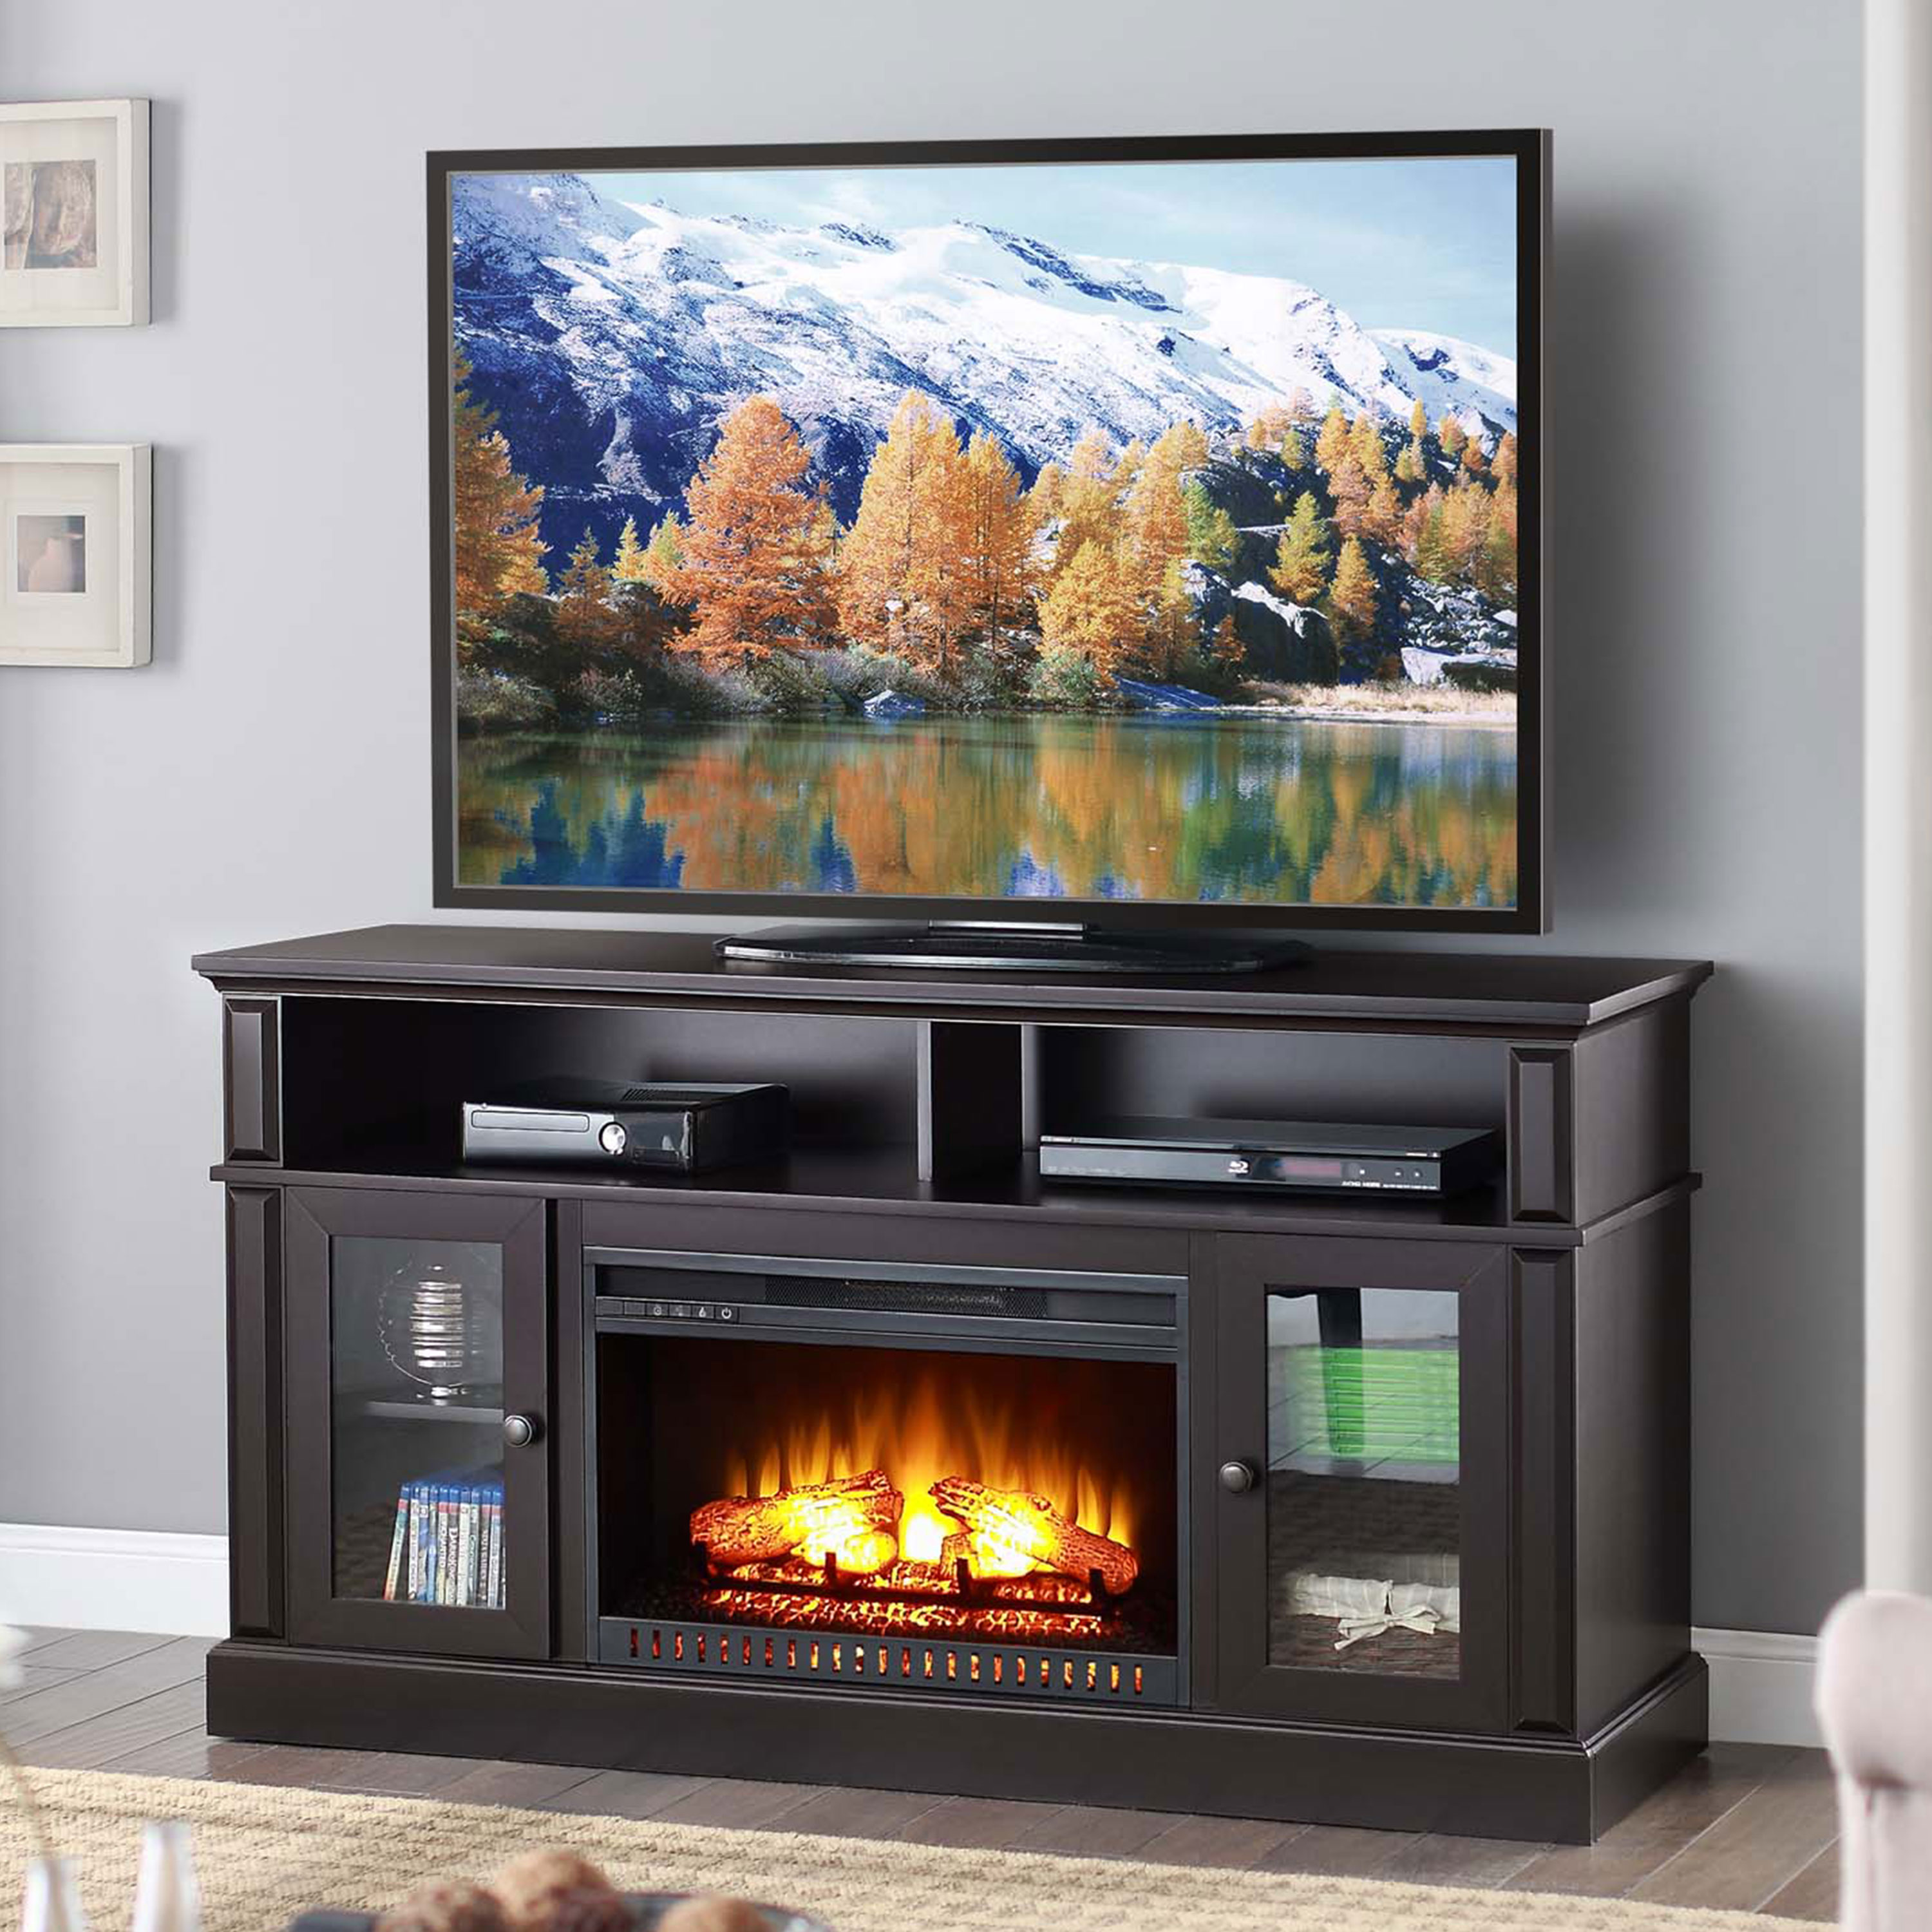 Whalen Barston Media Fireplace for TV's up to 70 Multiple Finishes - image 1 of 2